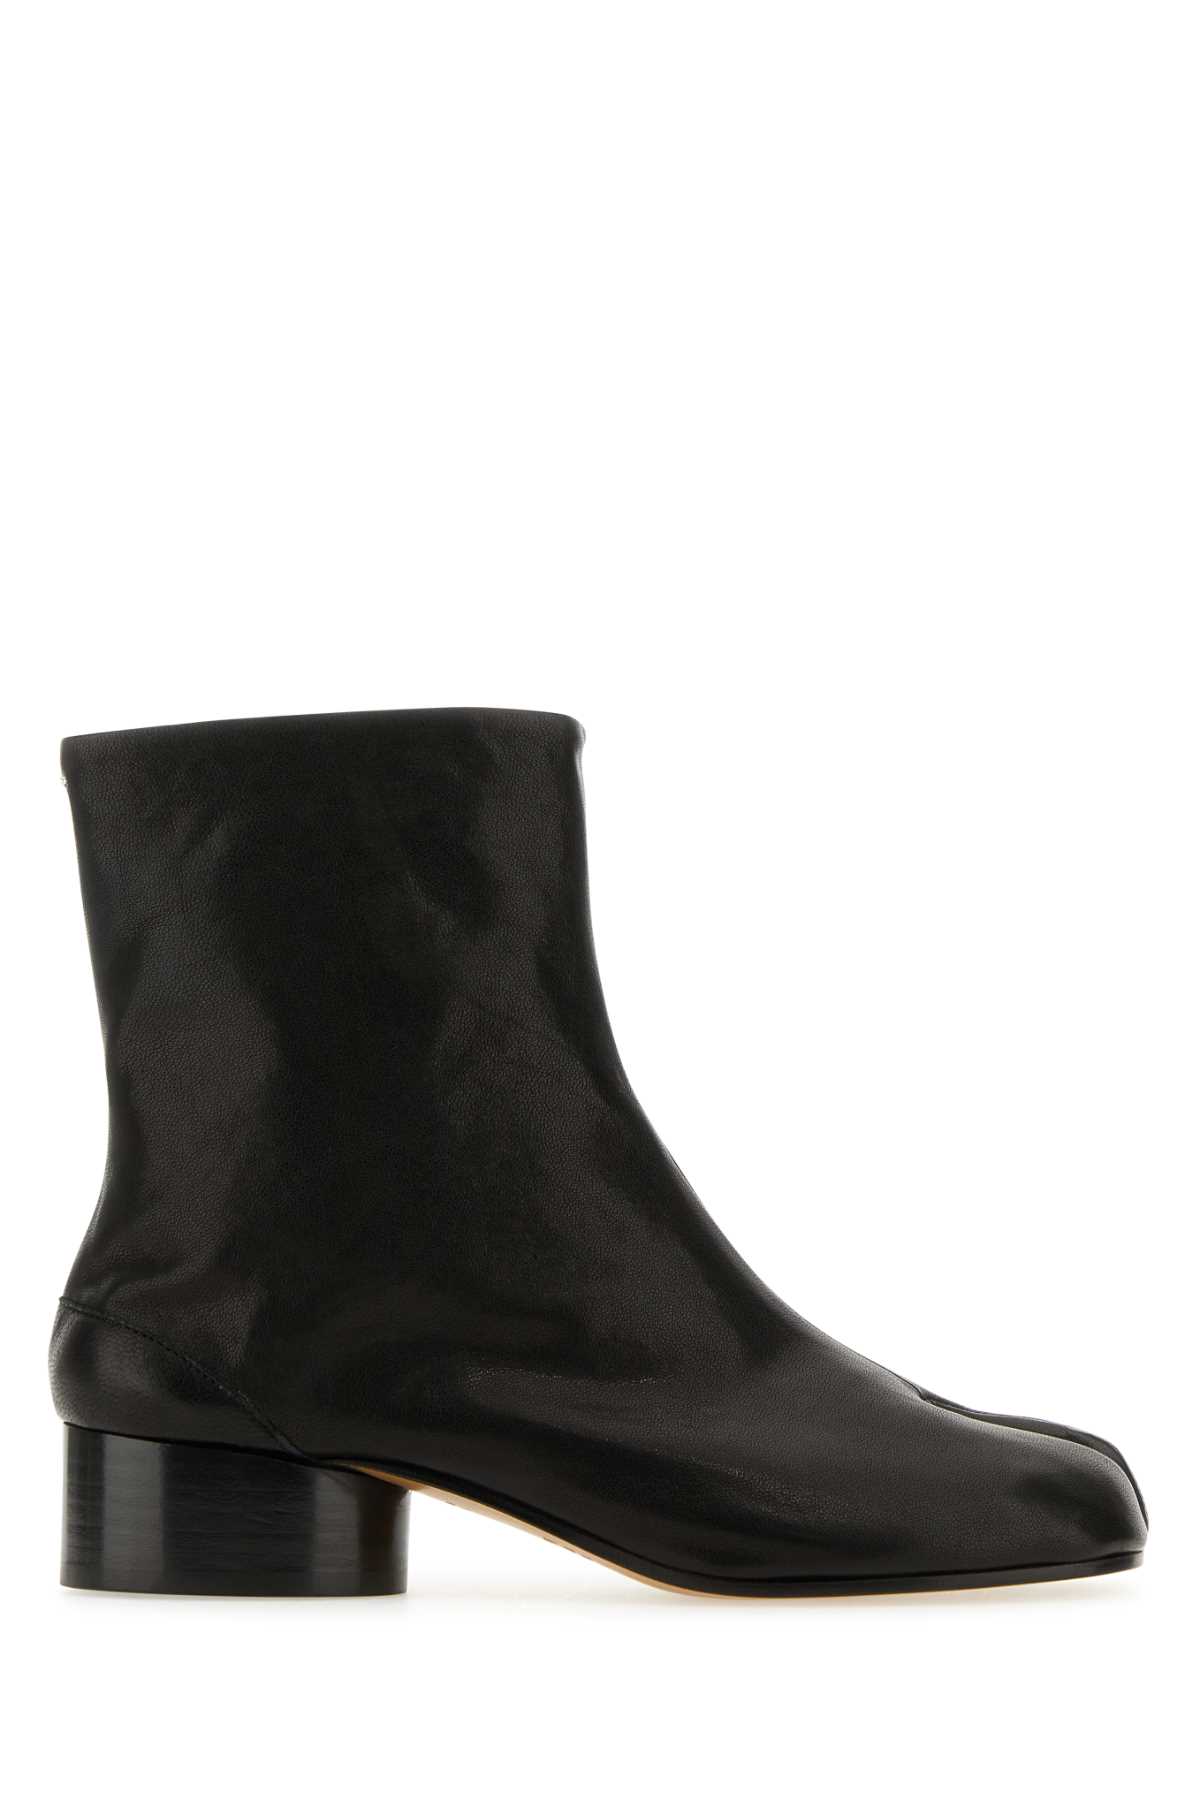 Shop Maison Margiela Black Nappa Leather Tabi Ankle Boots In T8013